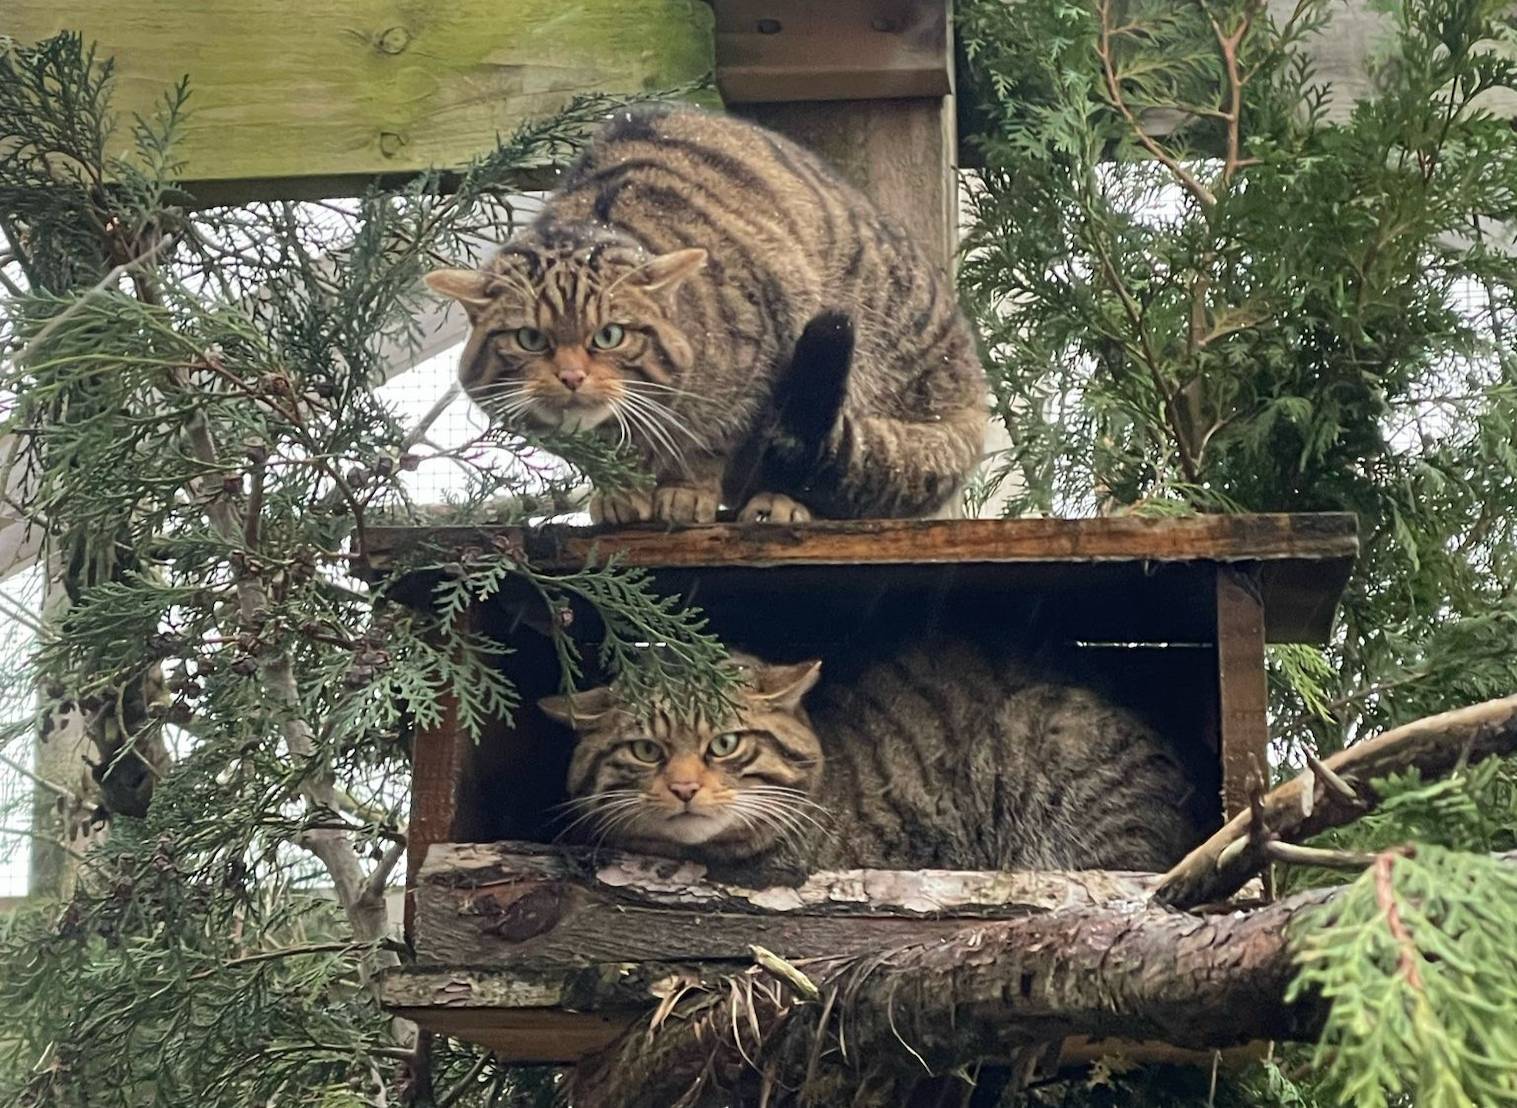 Two wildcats in off show conservation breeding for release camera sitting in and on top of box in enclosure looking toward camera

IMAGE 2024